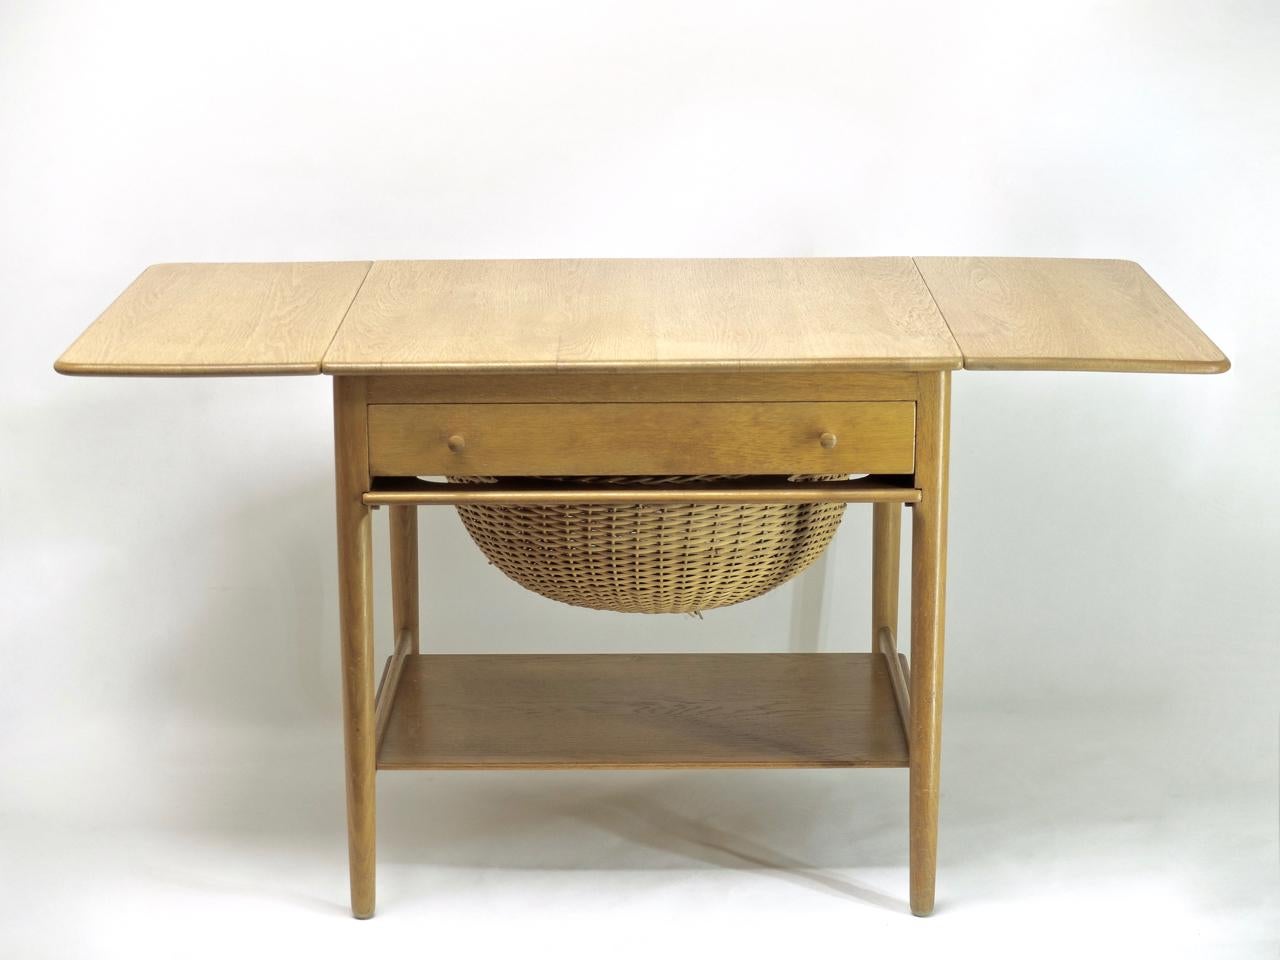 Sewing table, side table by Hans J. Wegner for Andreas Tuck made of oak with a pronounced wood grain from the 1950s. With 2 table extensions that can be folded up, a pull-out wicker basket, a drawer with holders for yarn, needles and accessories and